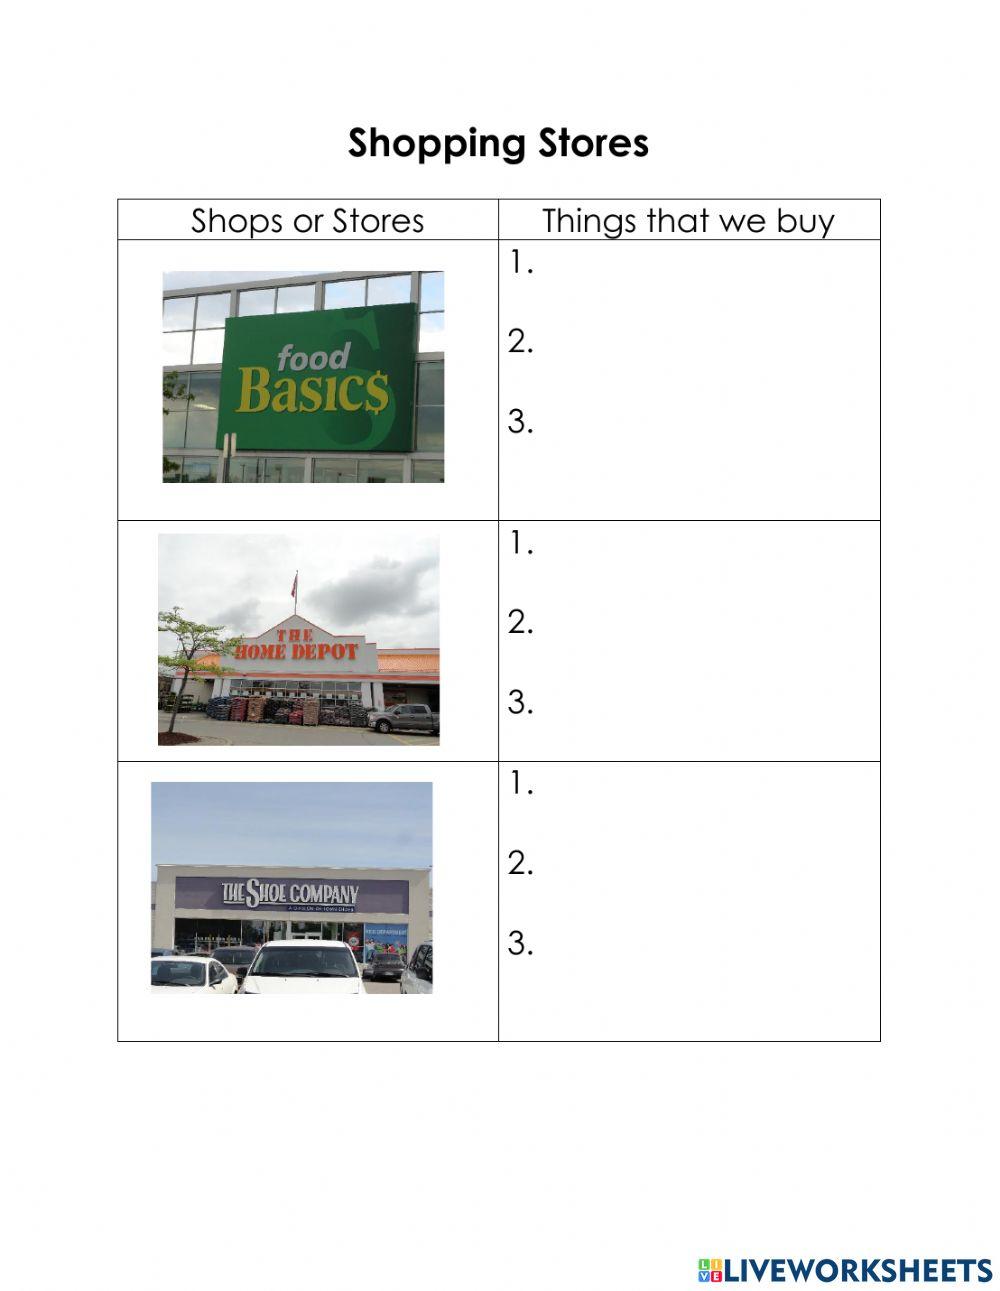 Types of Shops-Stores